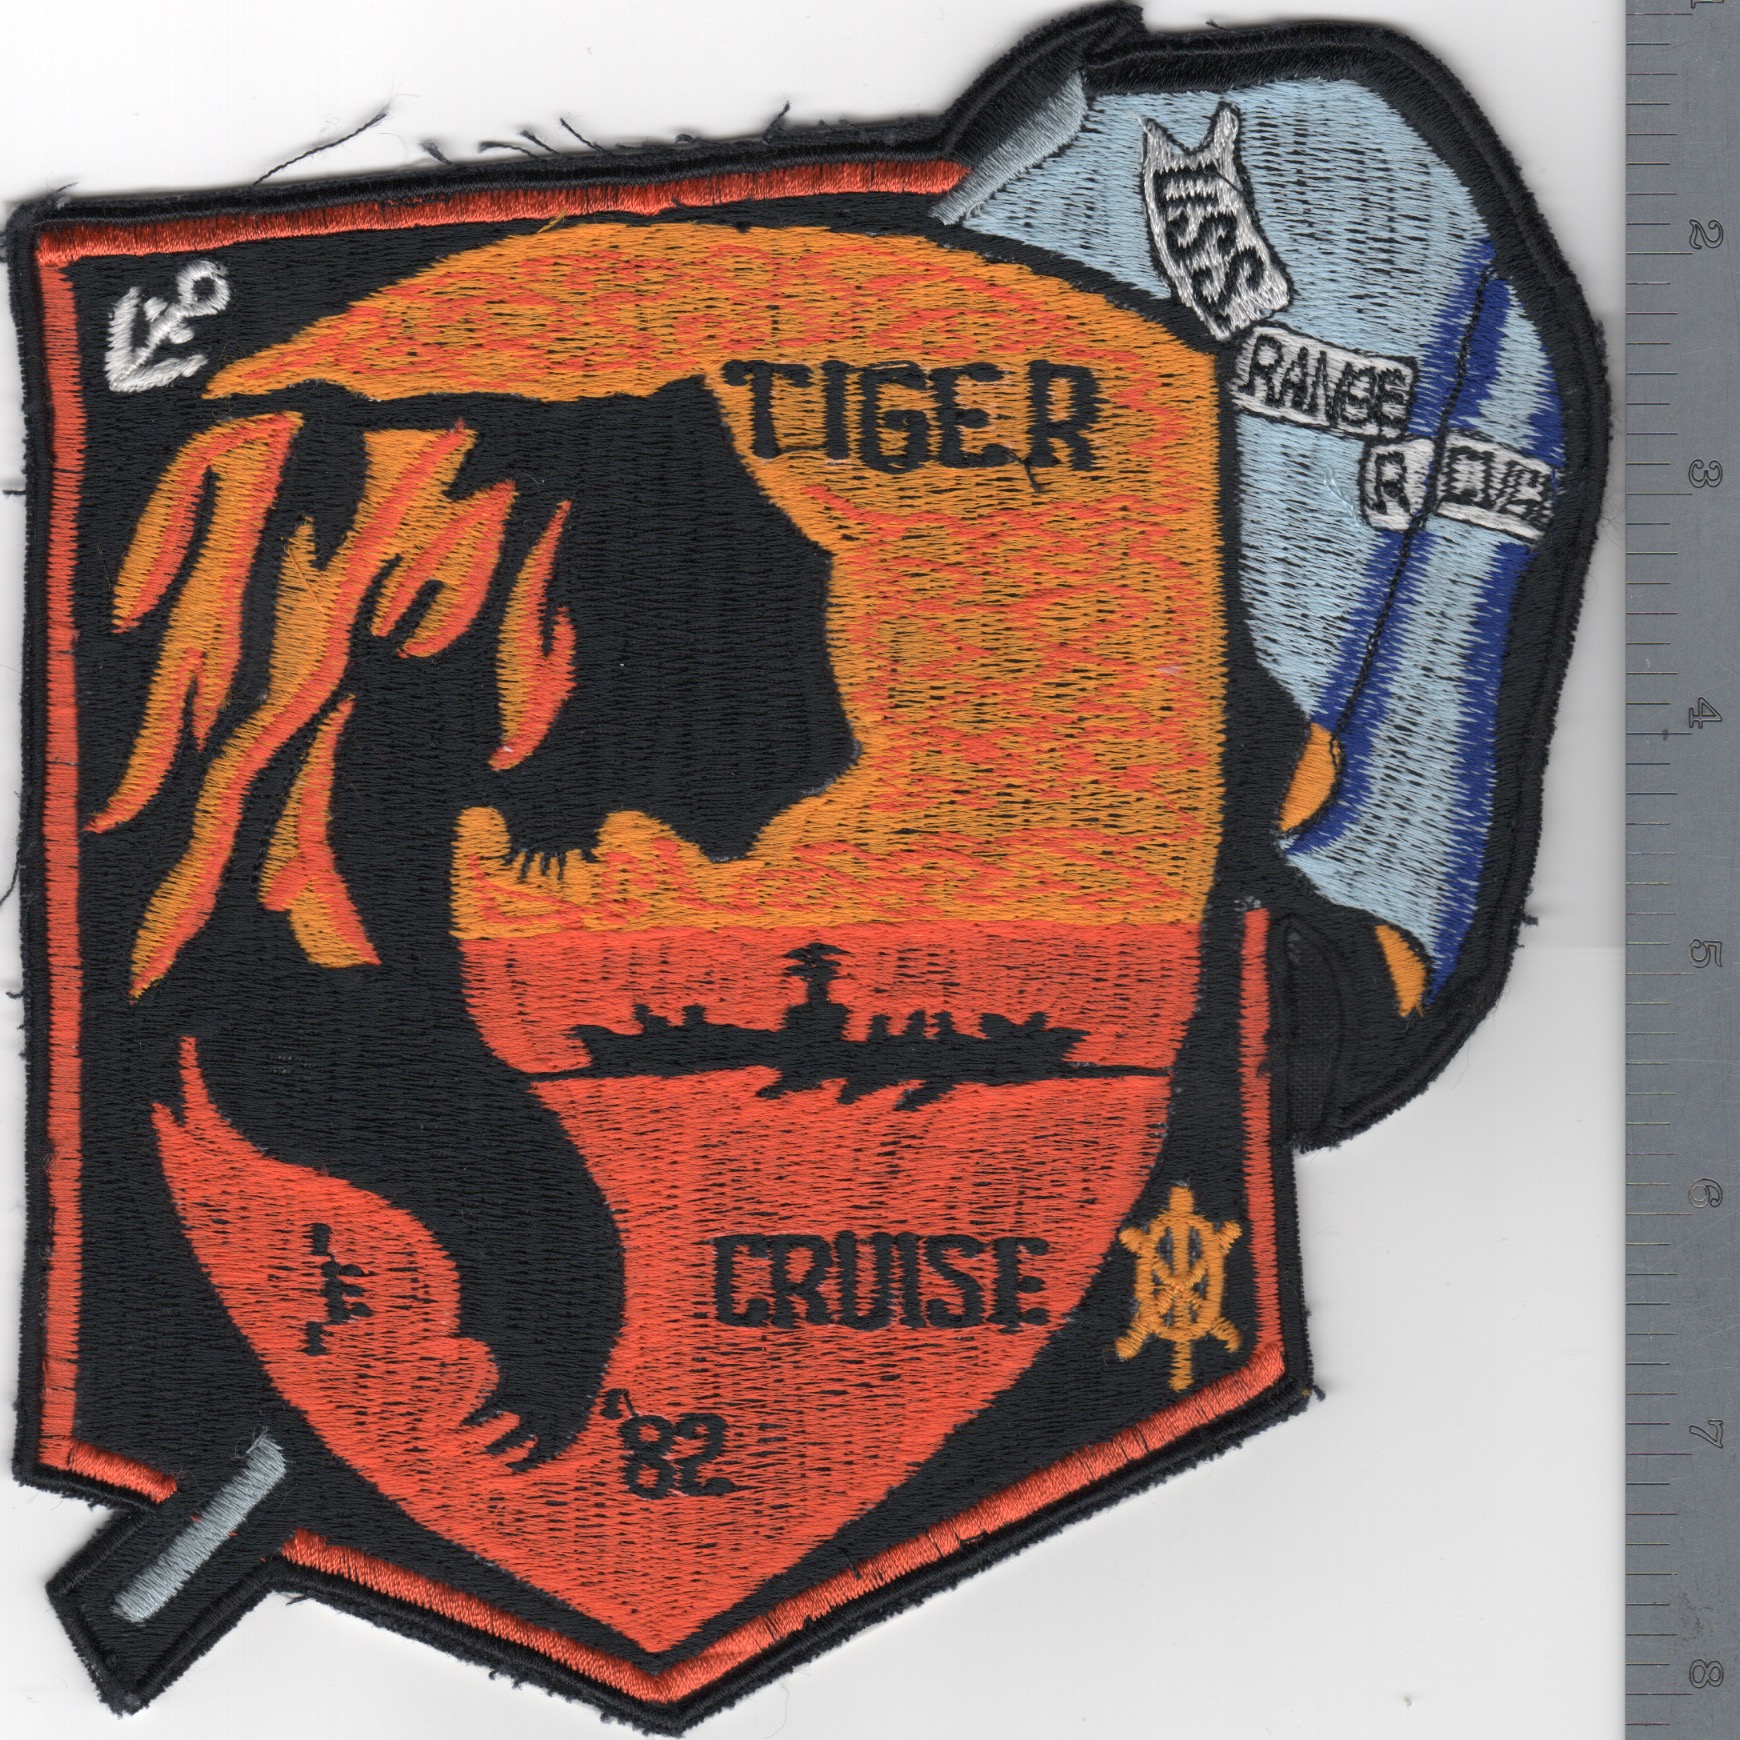 357) CV-61 1982 'TIGER Cruise' Backpatch